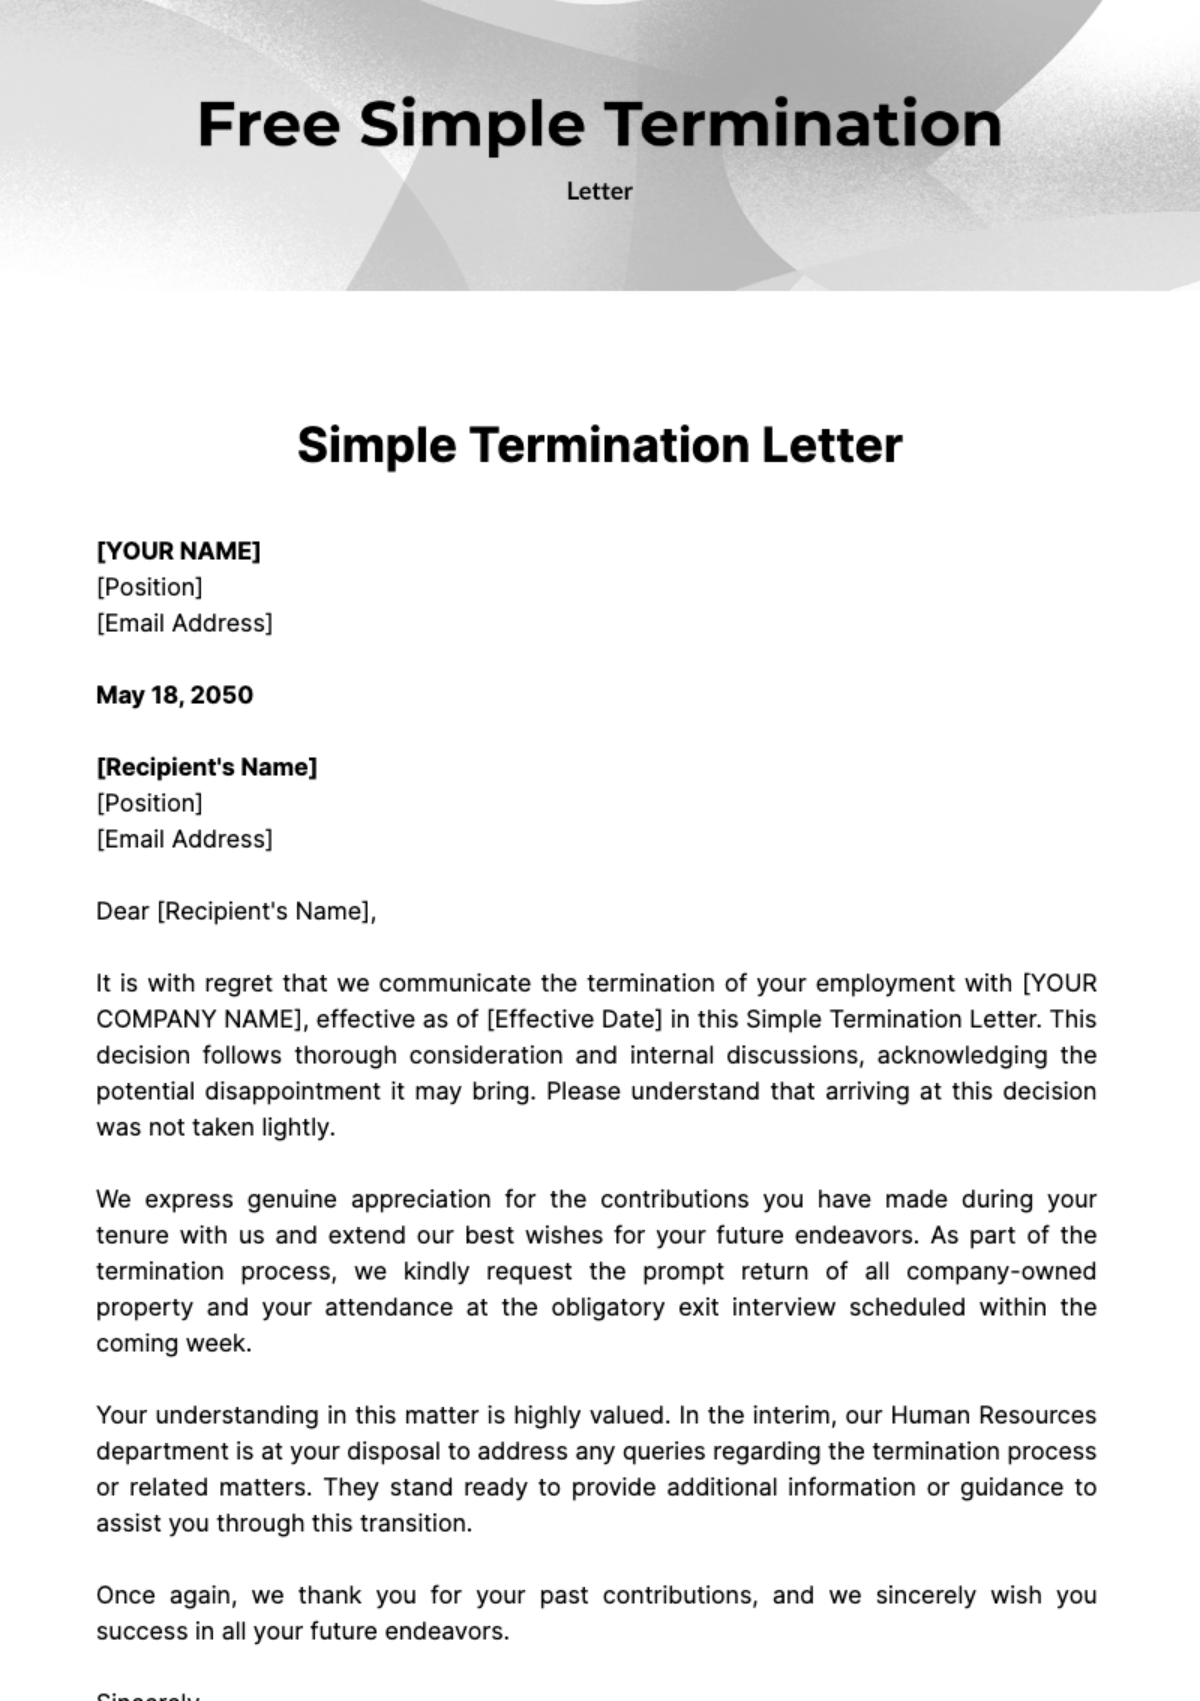 Free Simple Termination Letter Template